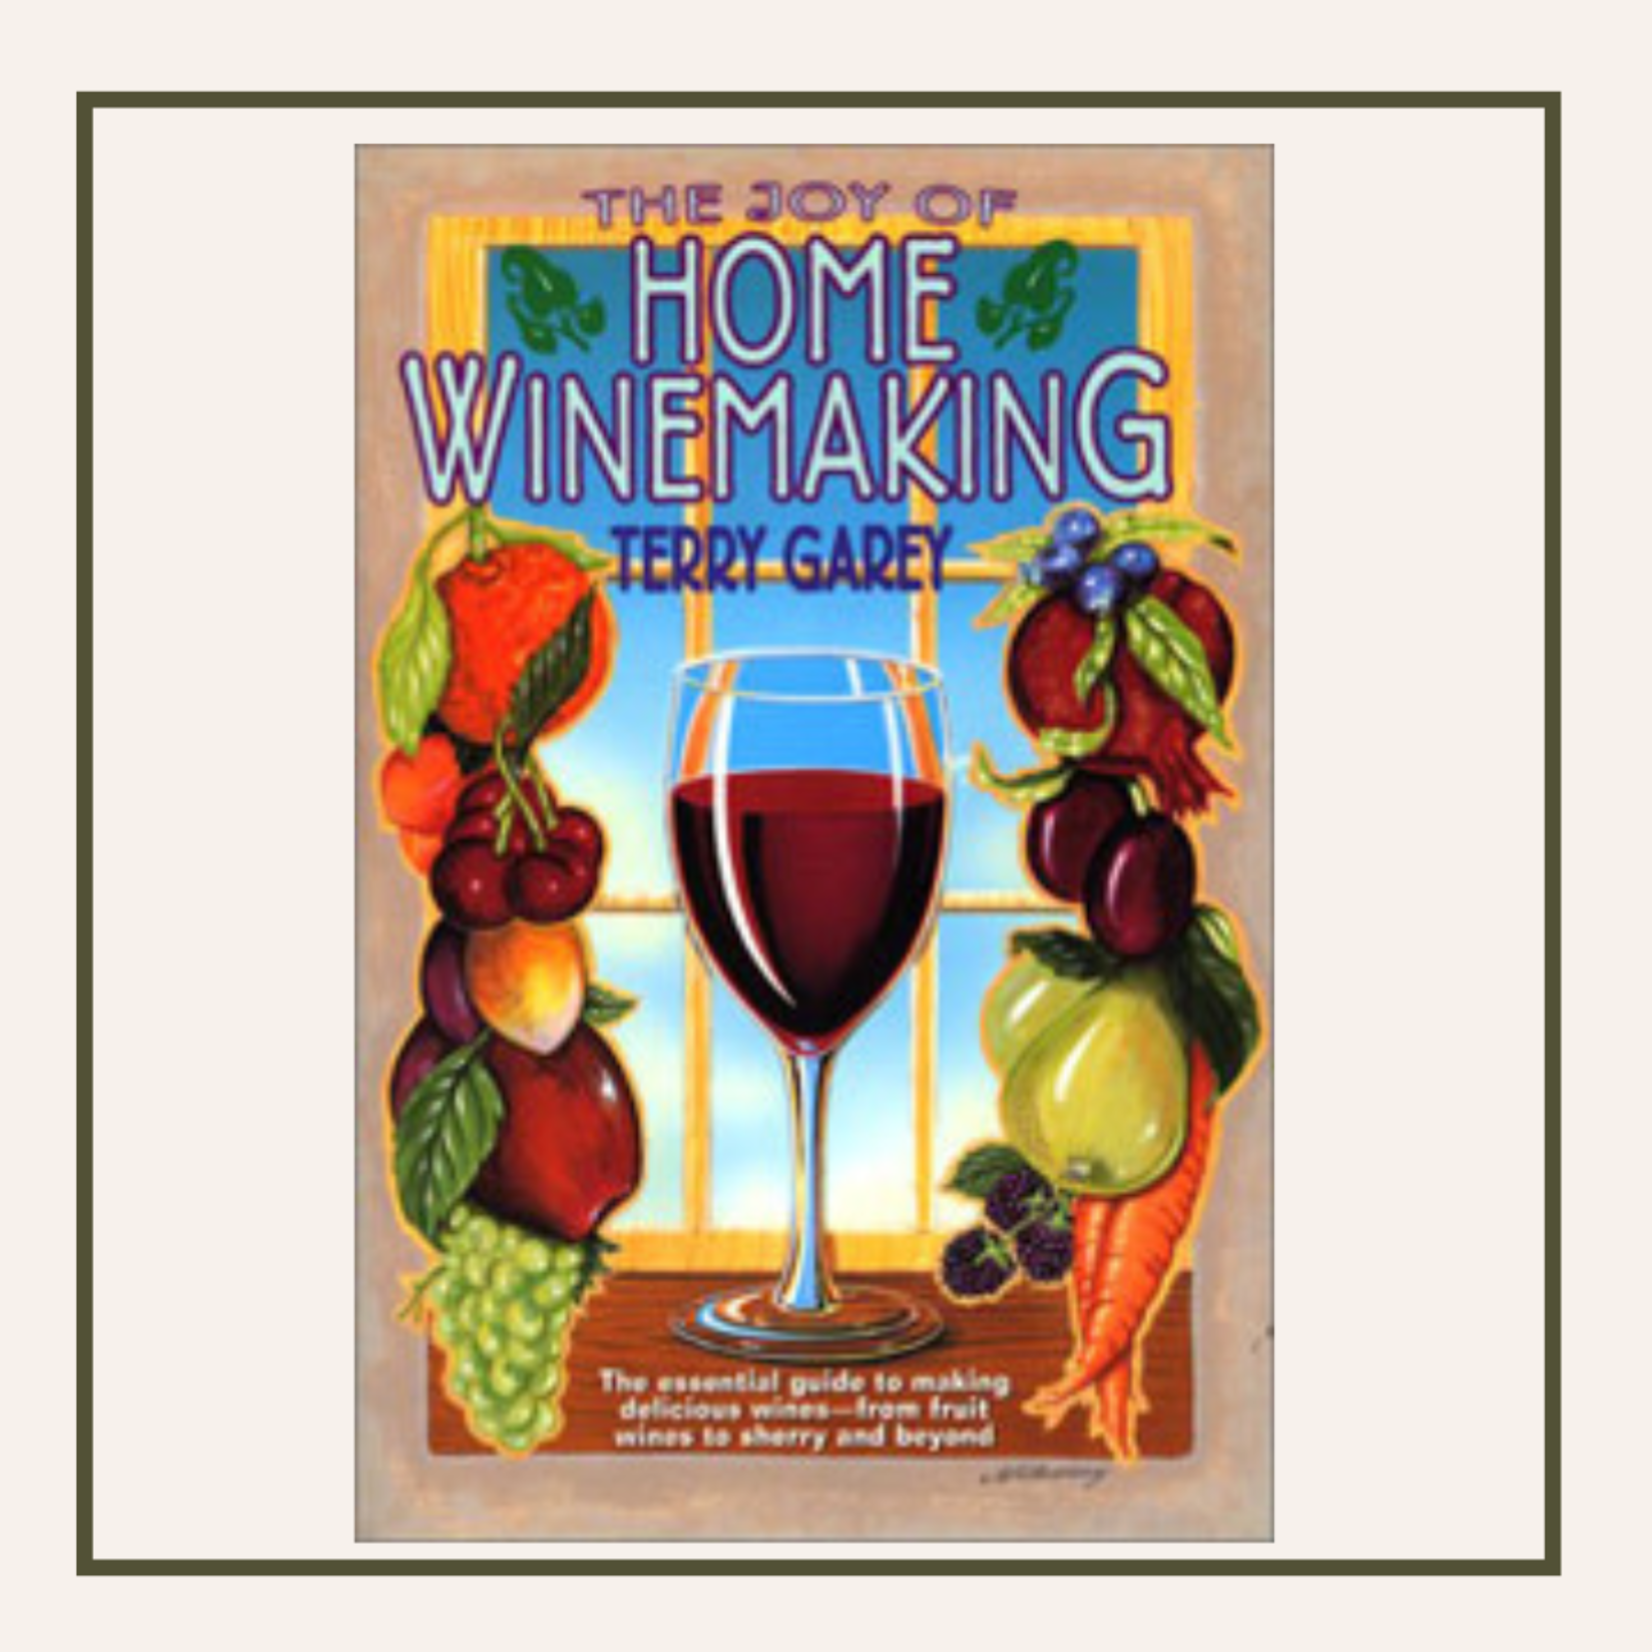 The Joy of Home Winemaking by Terry Garey